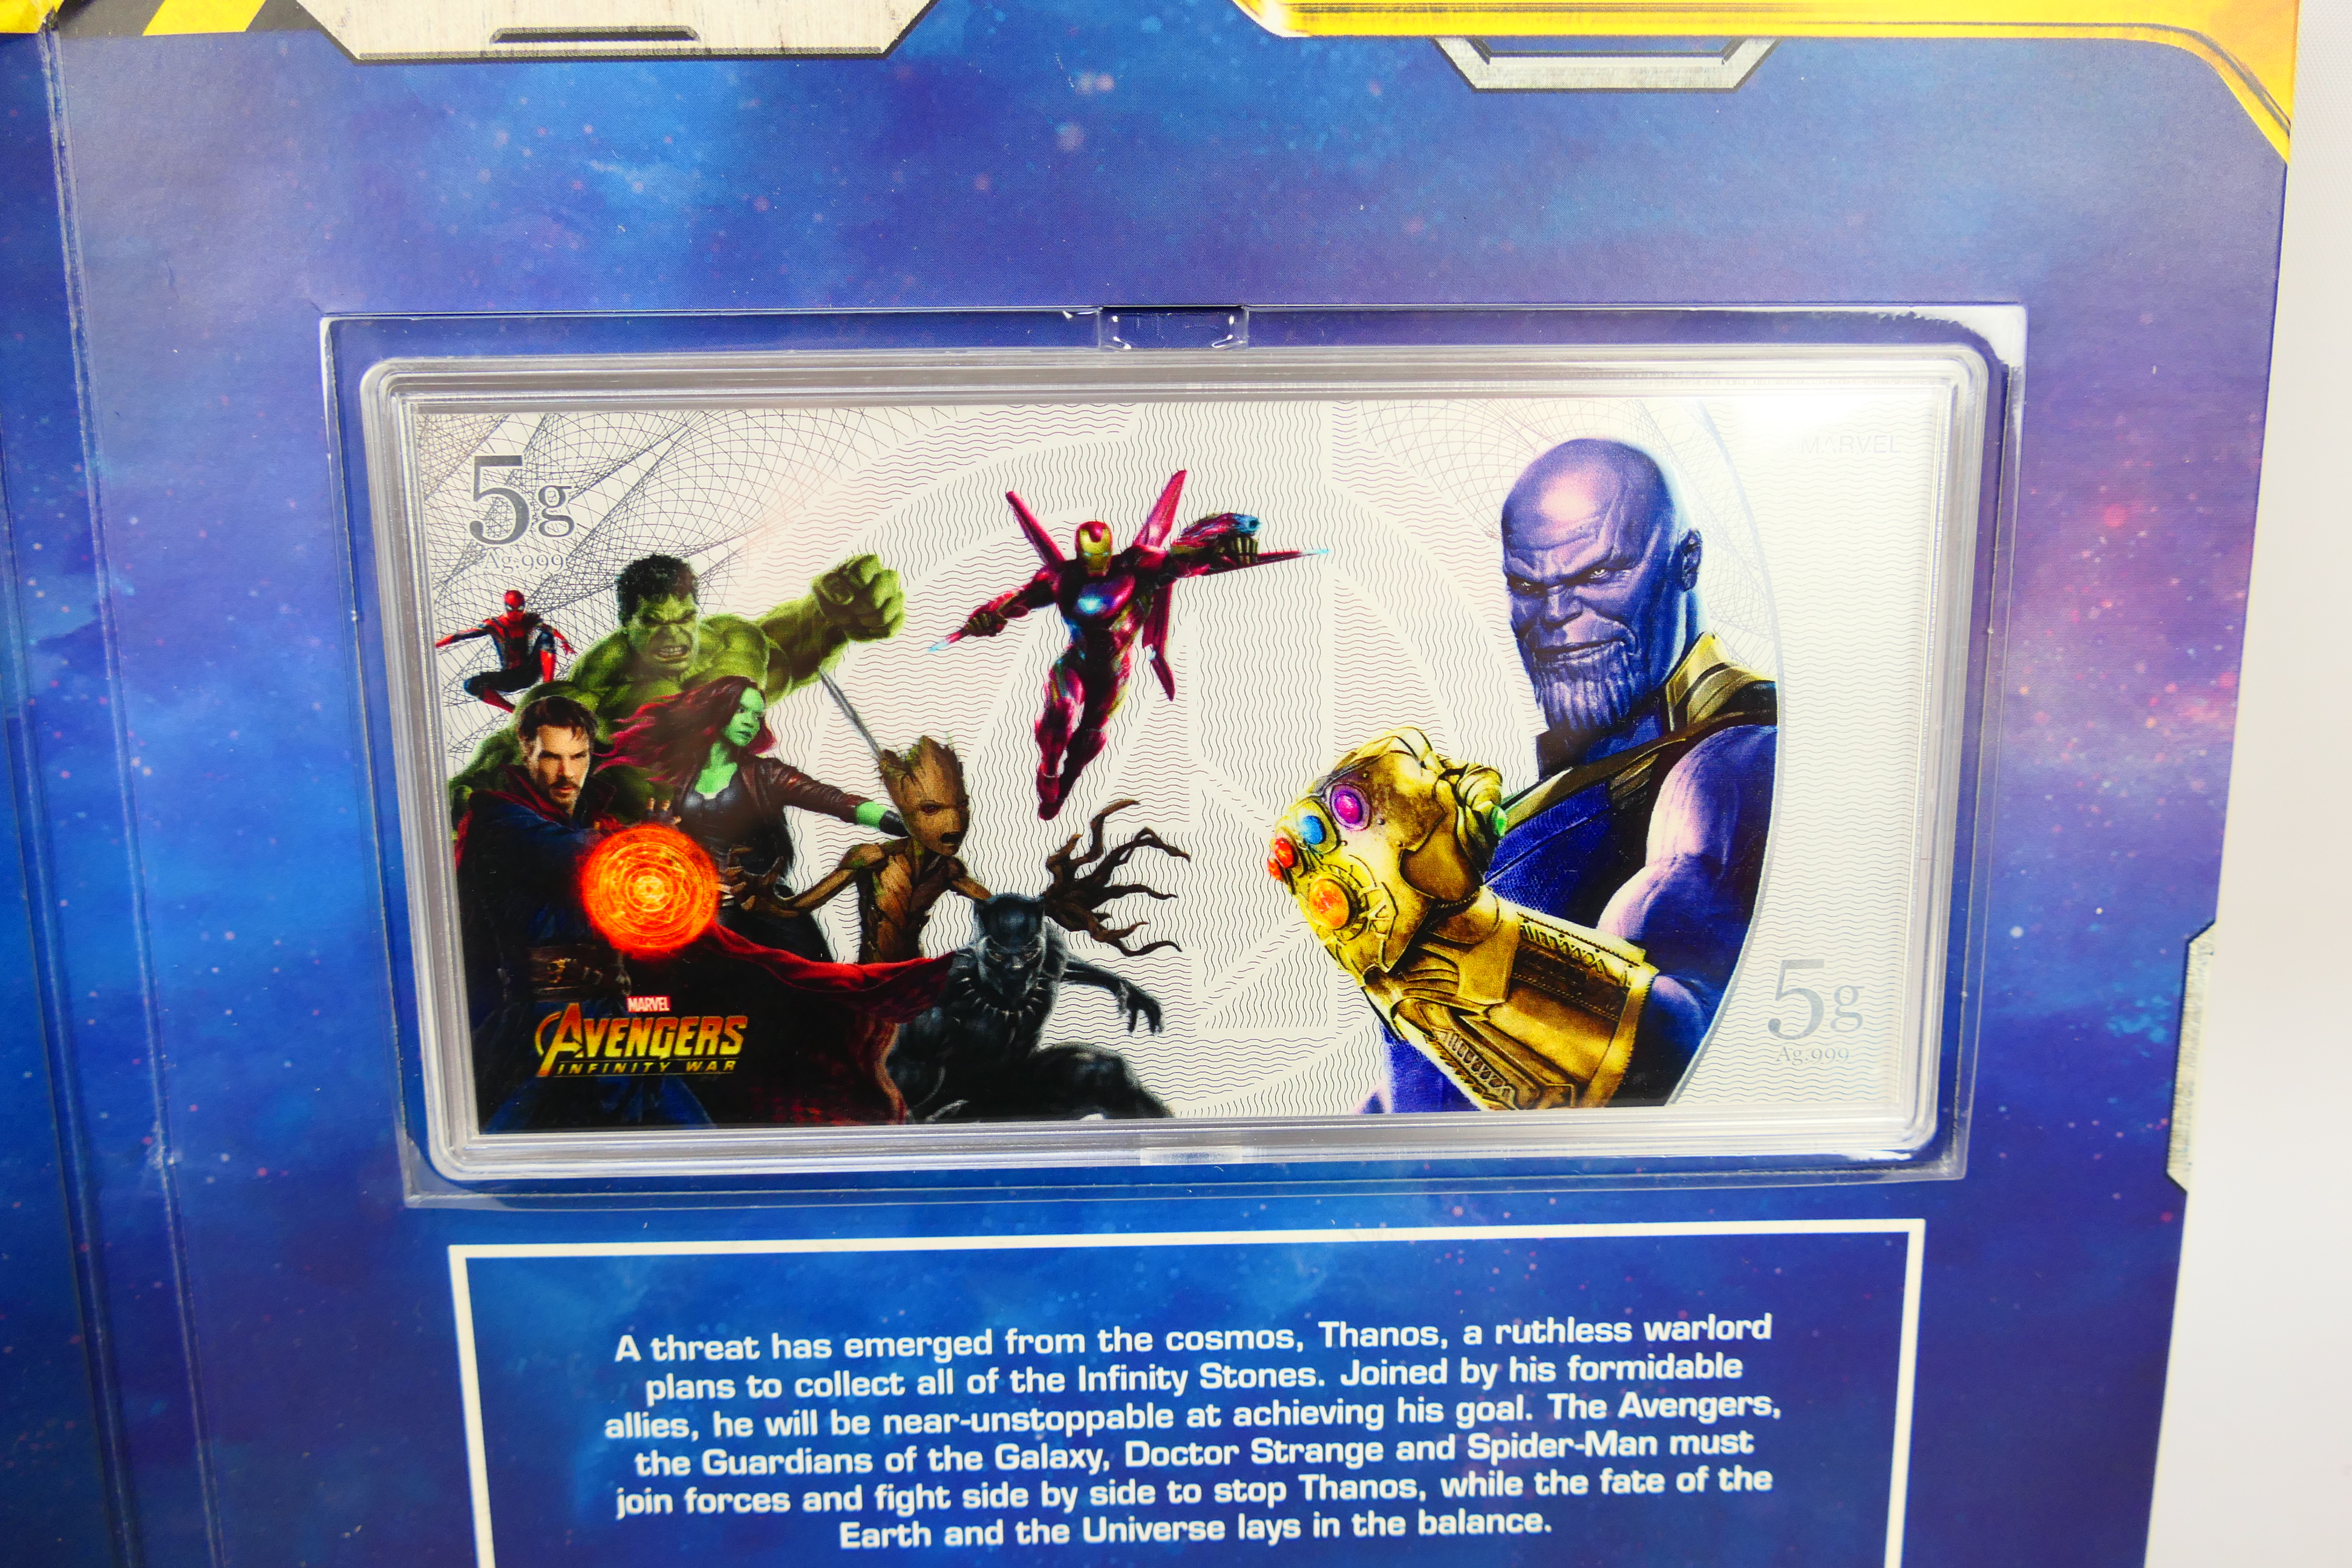 Marvel - An Avengers Infinity War Official Collector Pack comprising 15 commemorative coins and an - Image 8 of 9